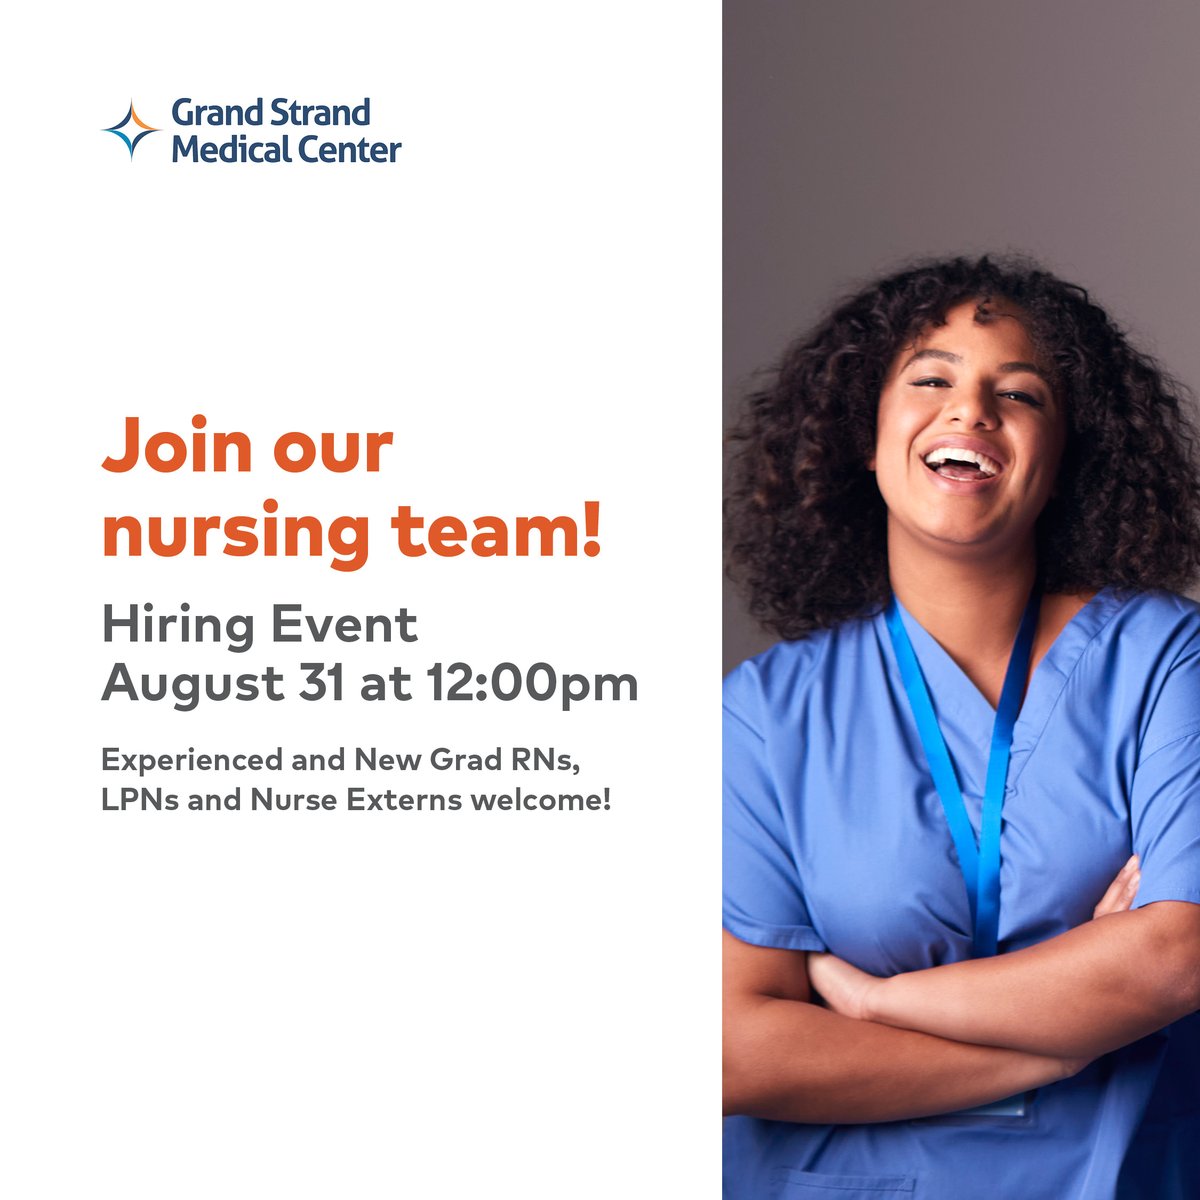 Land your dream career with us at Grand Strand Medical Center! We invite experienced RNs, New Grad RNs, Nurse Externs and LPNs to join us for our hiring event on August 31 from 12 - 4 pm. RSVP today! careerevents.hcahealthcare.com/59c81153